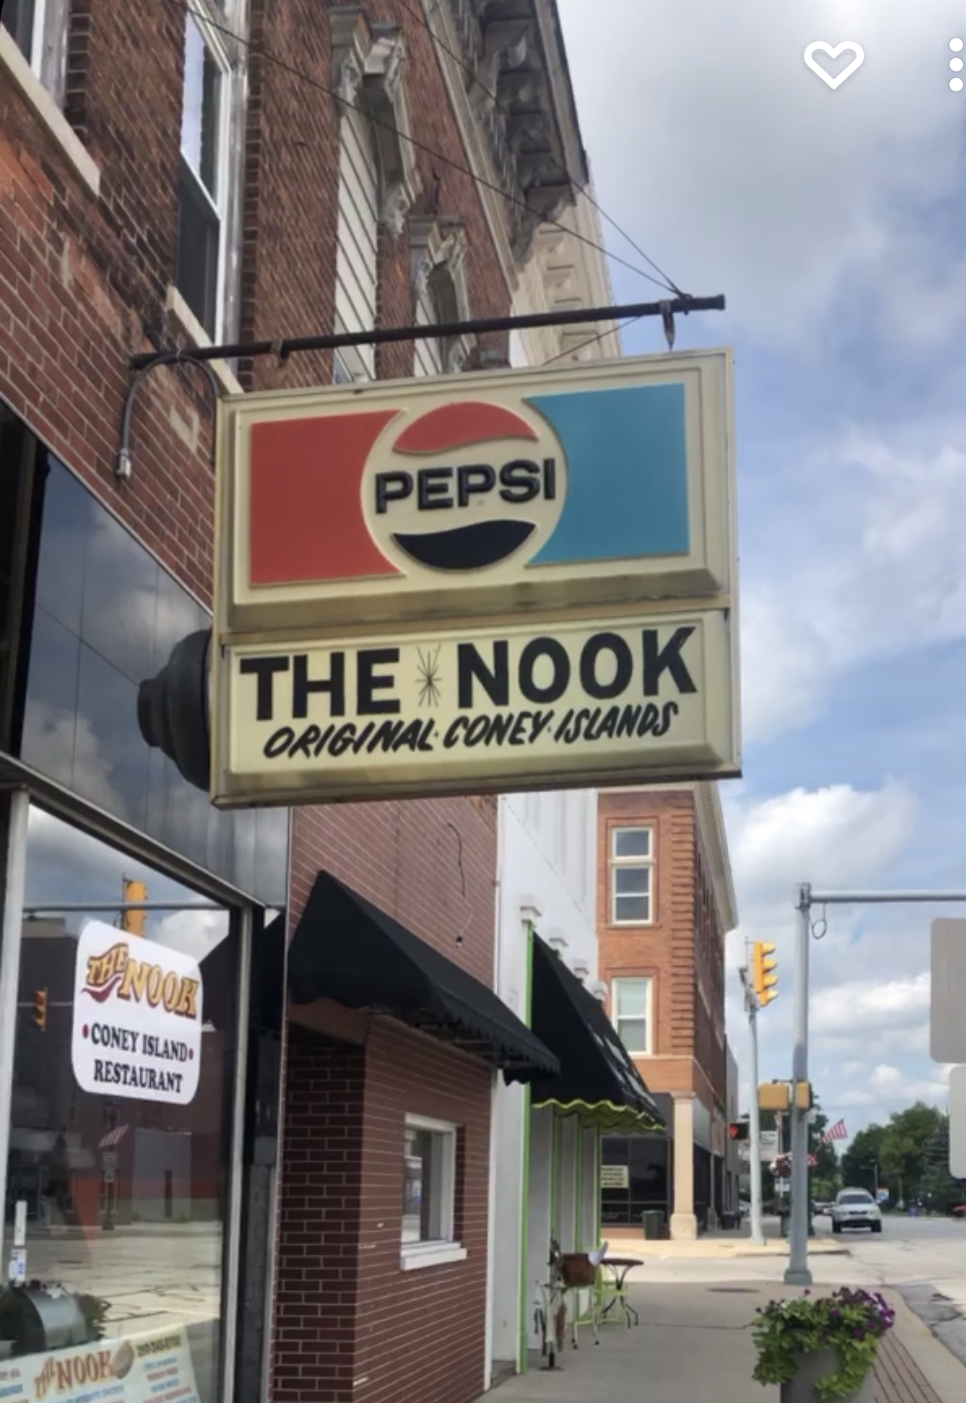 The NOOK